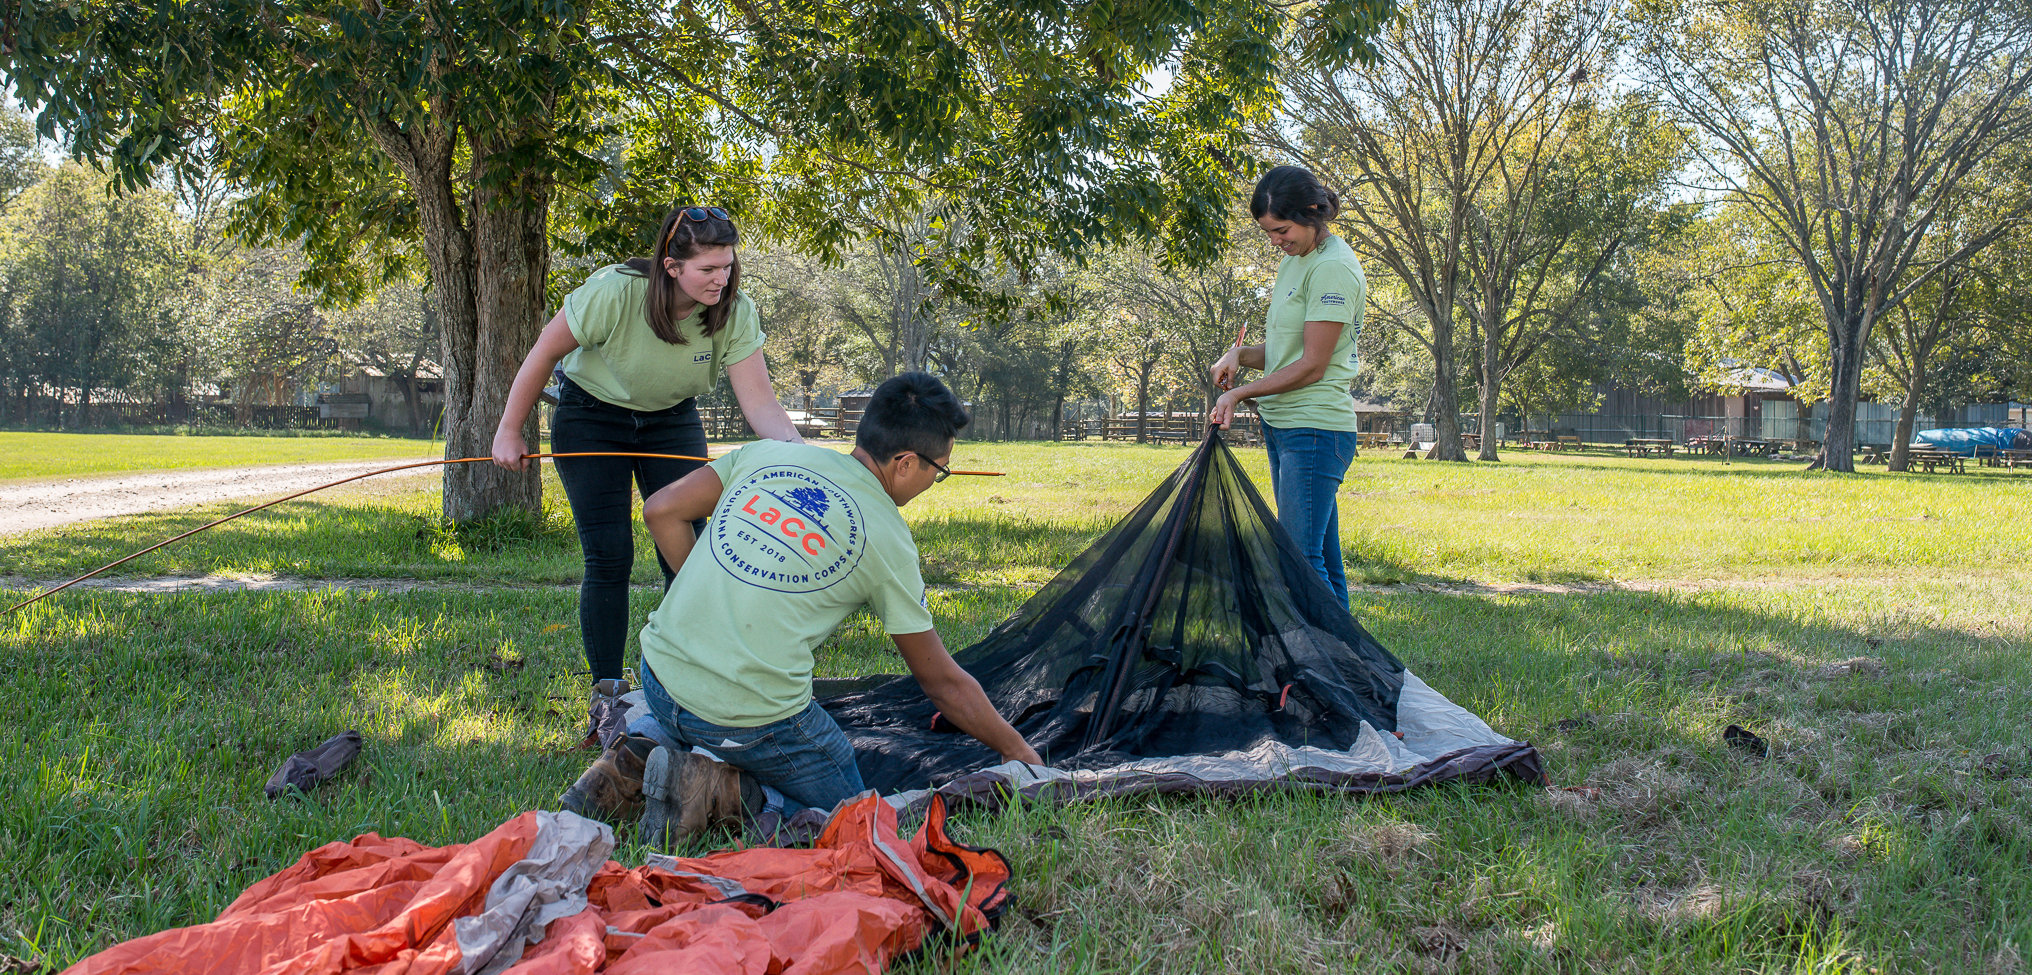 Crew members setting up a tent.